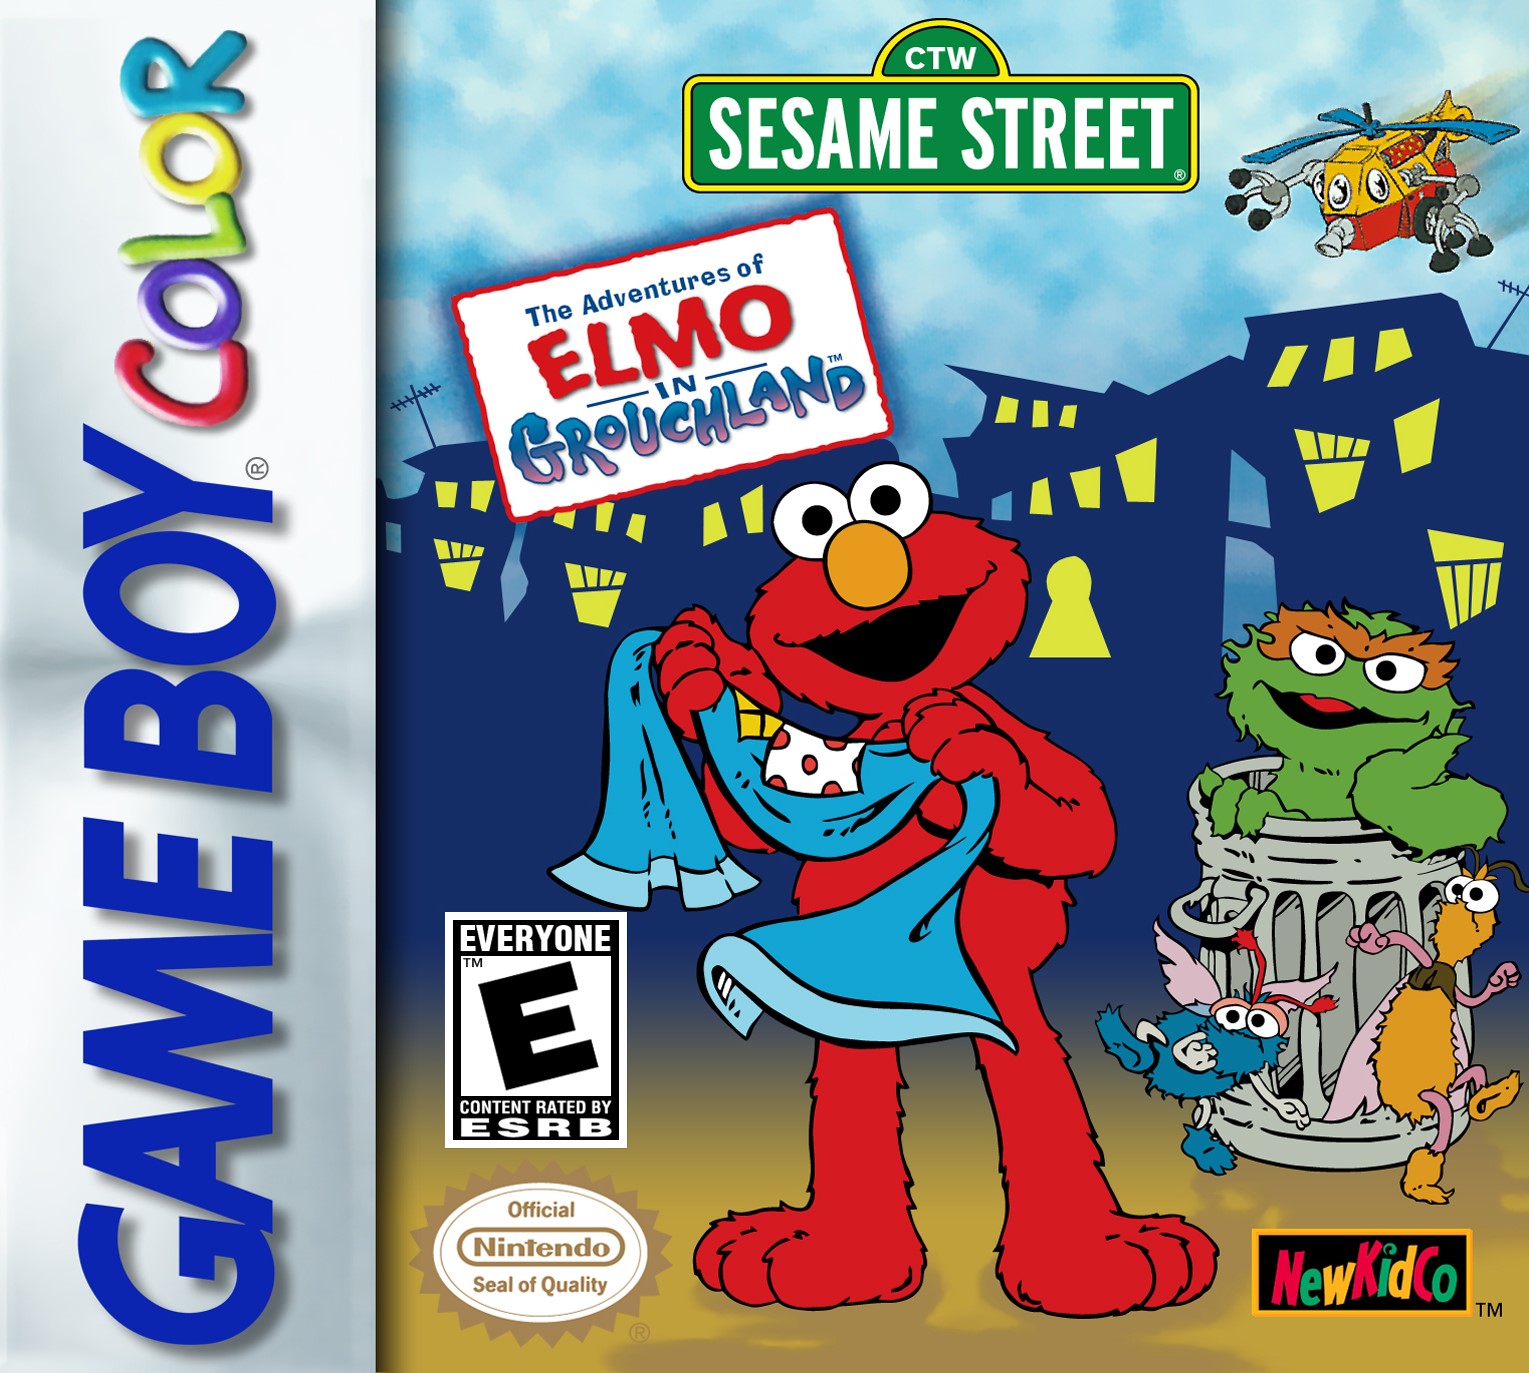 'The Adventures of Elmo in Grouchland'